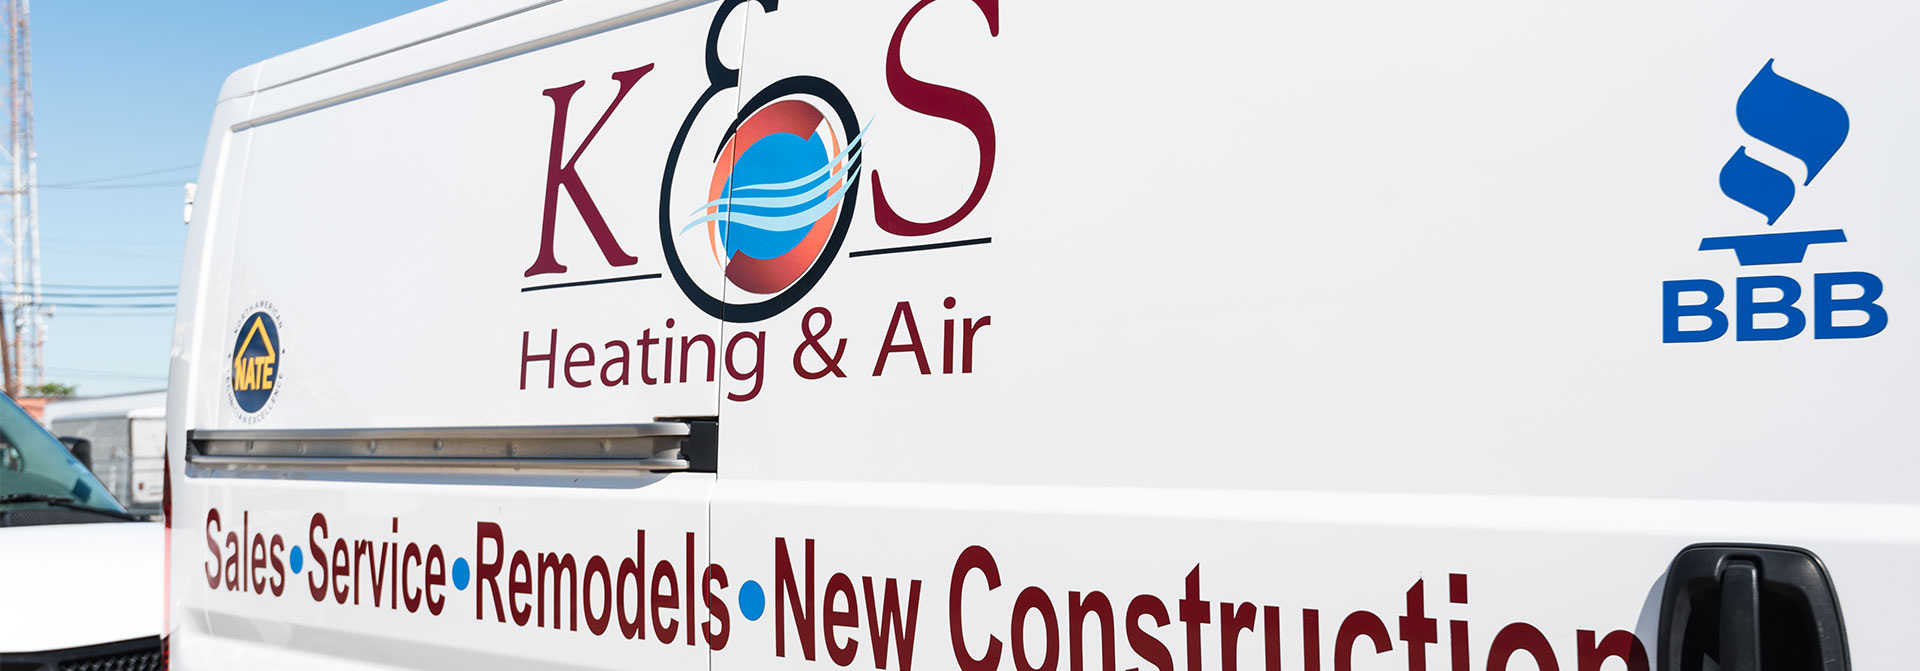 K&S Heating & Air Conditioning Services in Dallas, Texas